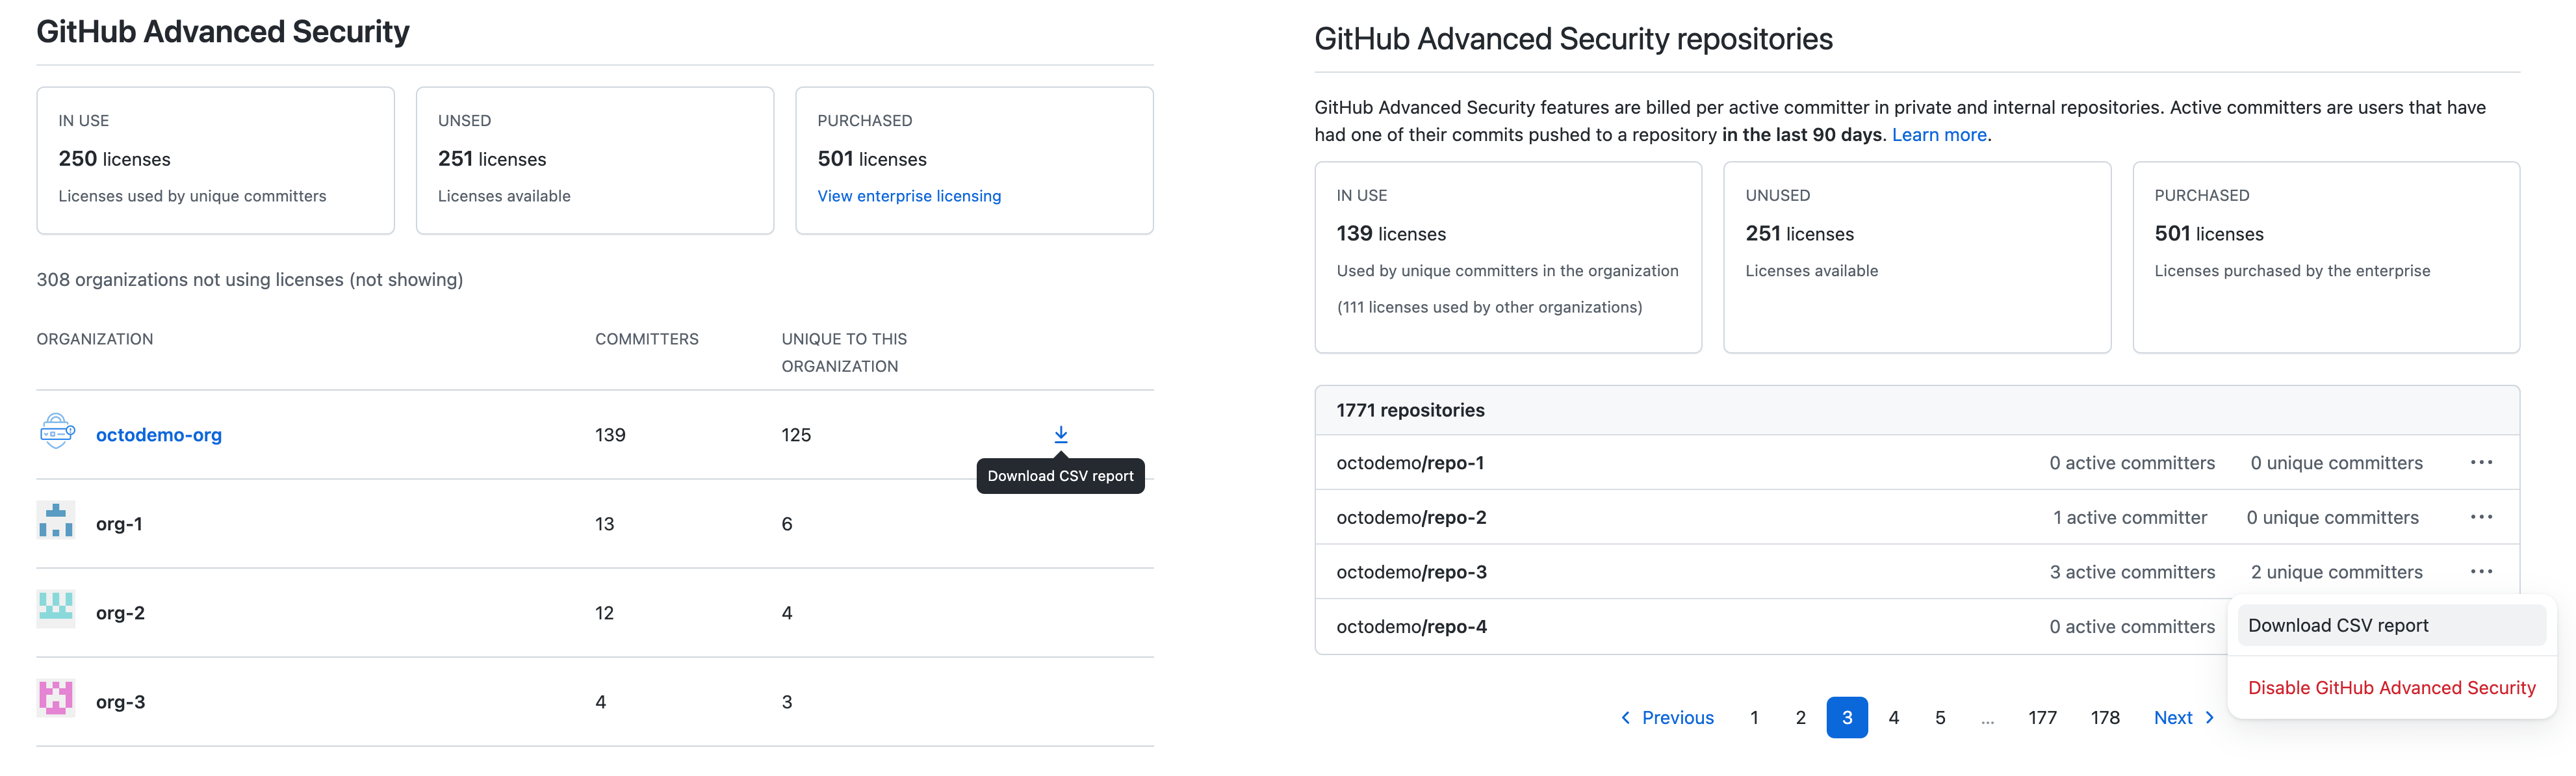 Enterprise and Organisation GitHub Advanced Security usage